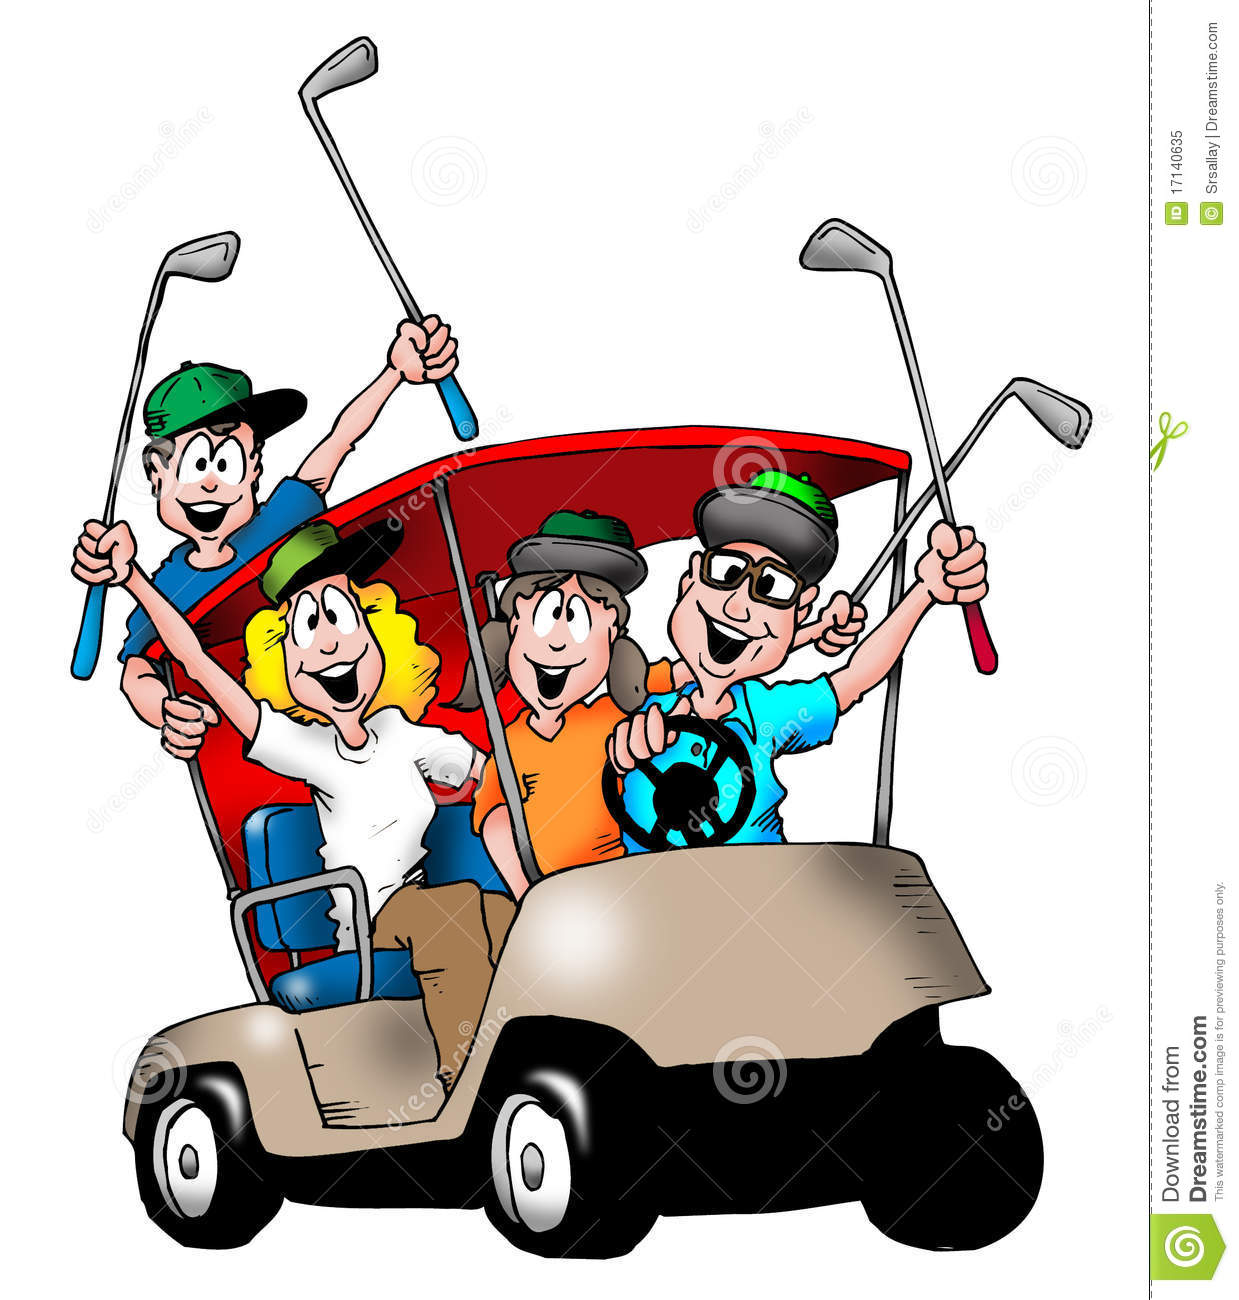 Image Of A Family Playing Golf And Riding In A Golf Cart Together